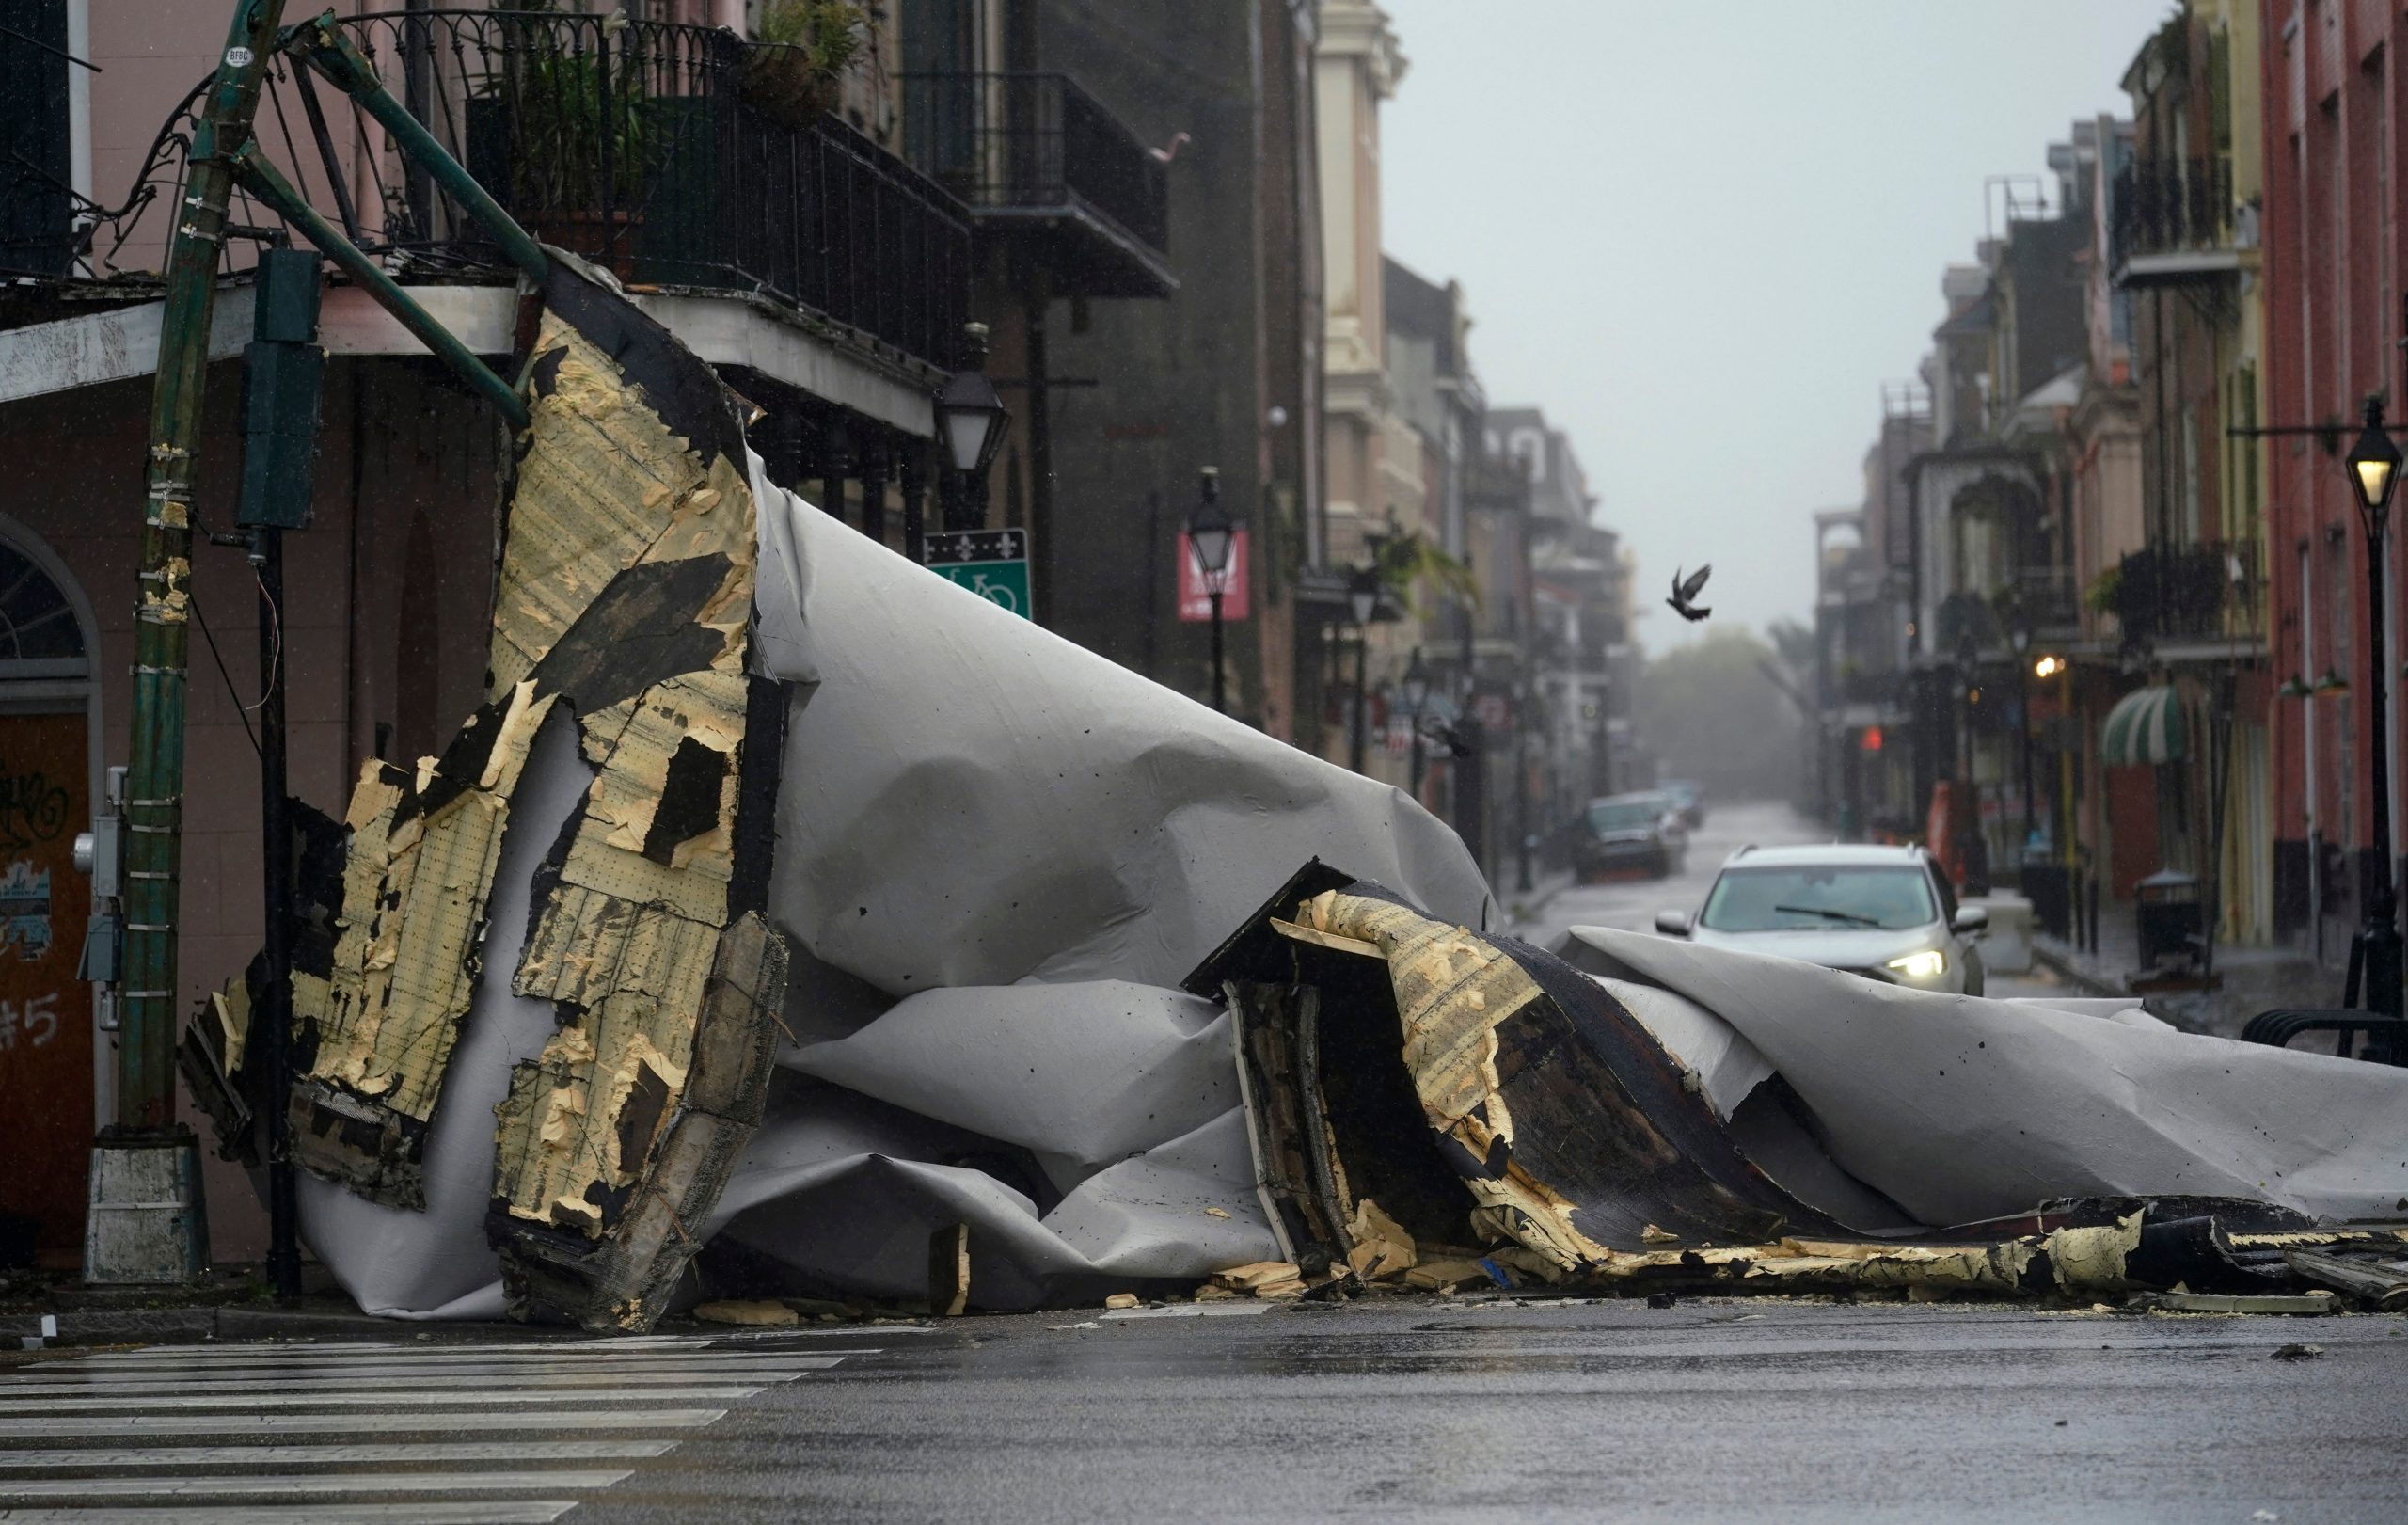 New Orleans declares a night curfew in the aftermath of Hurricane Ida